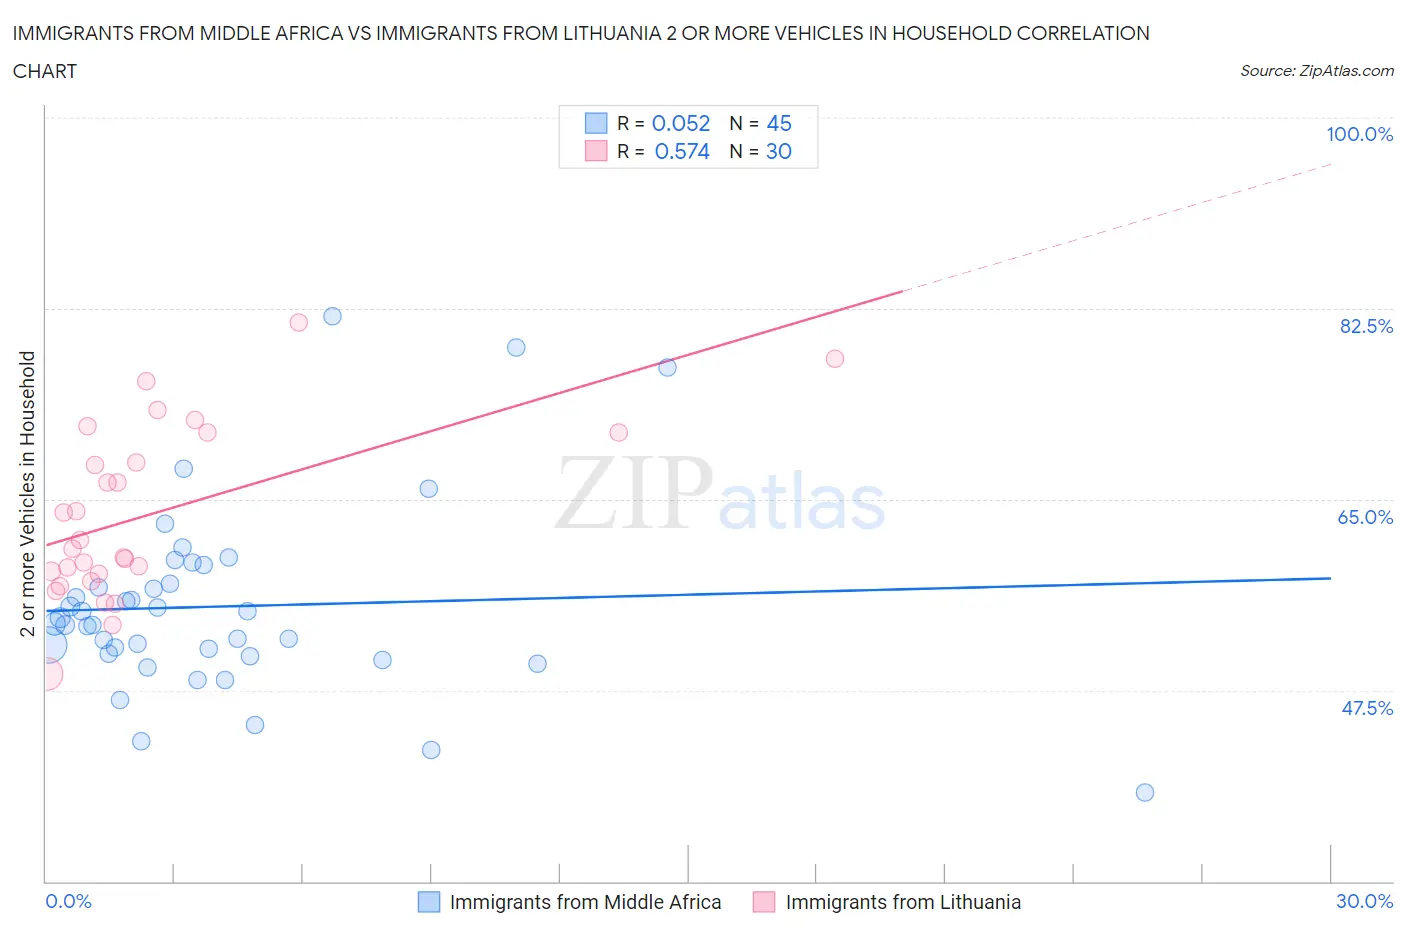 Immigrants from Middle Africa vs Immigrants from Lithuania 2 or more Vehicles in Household